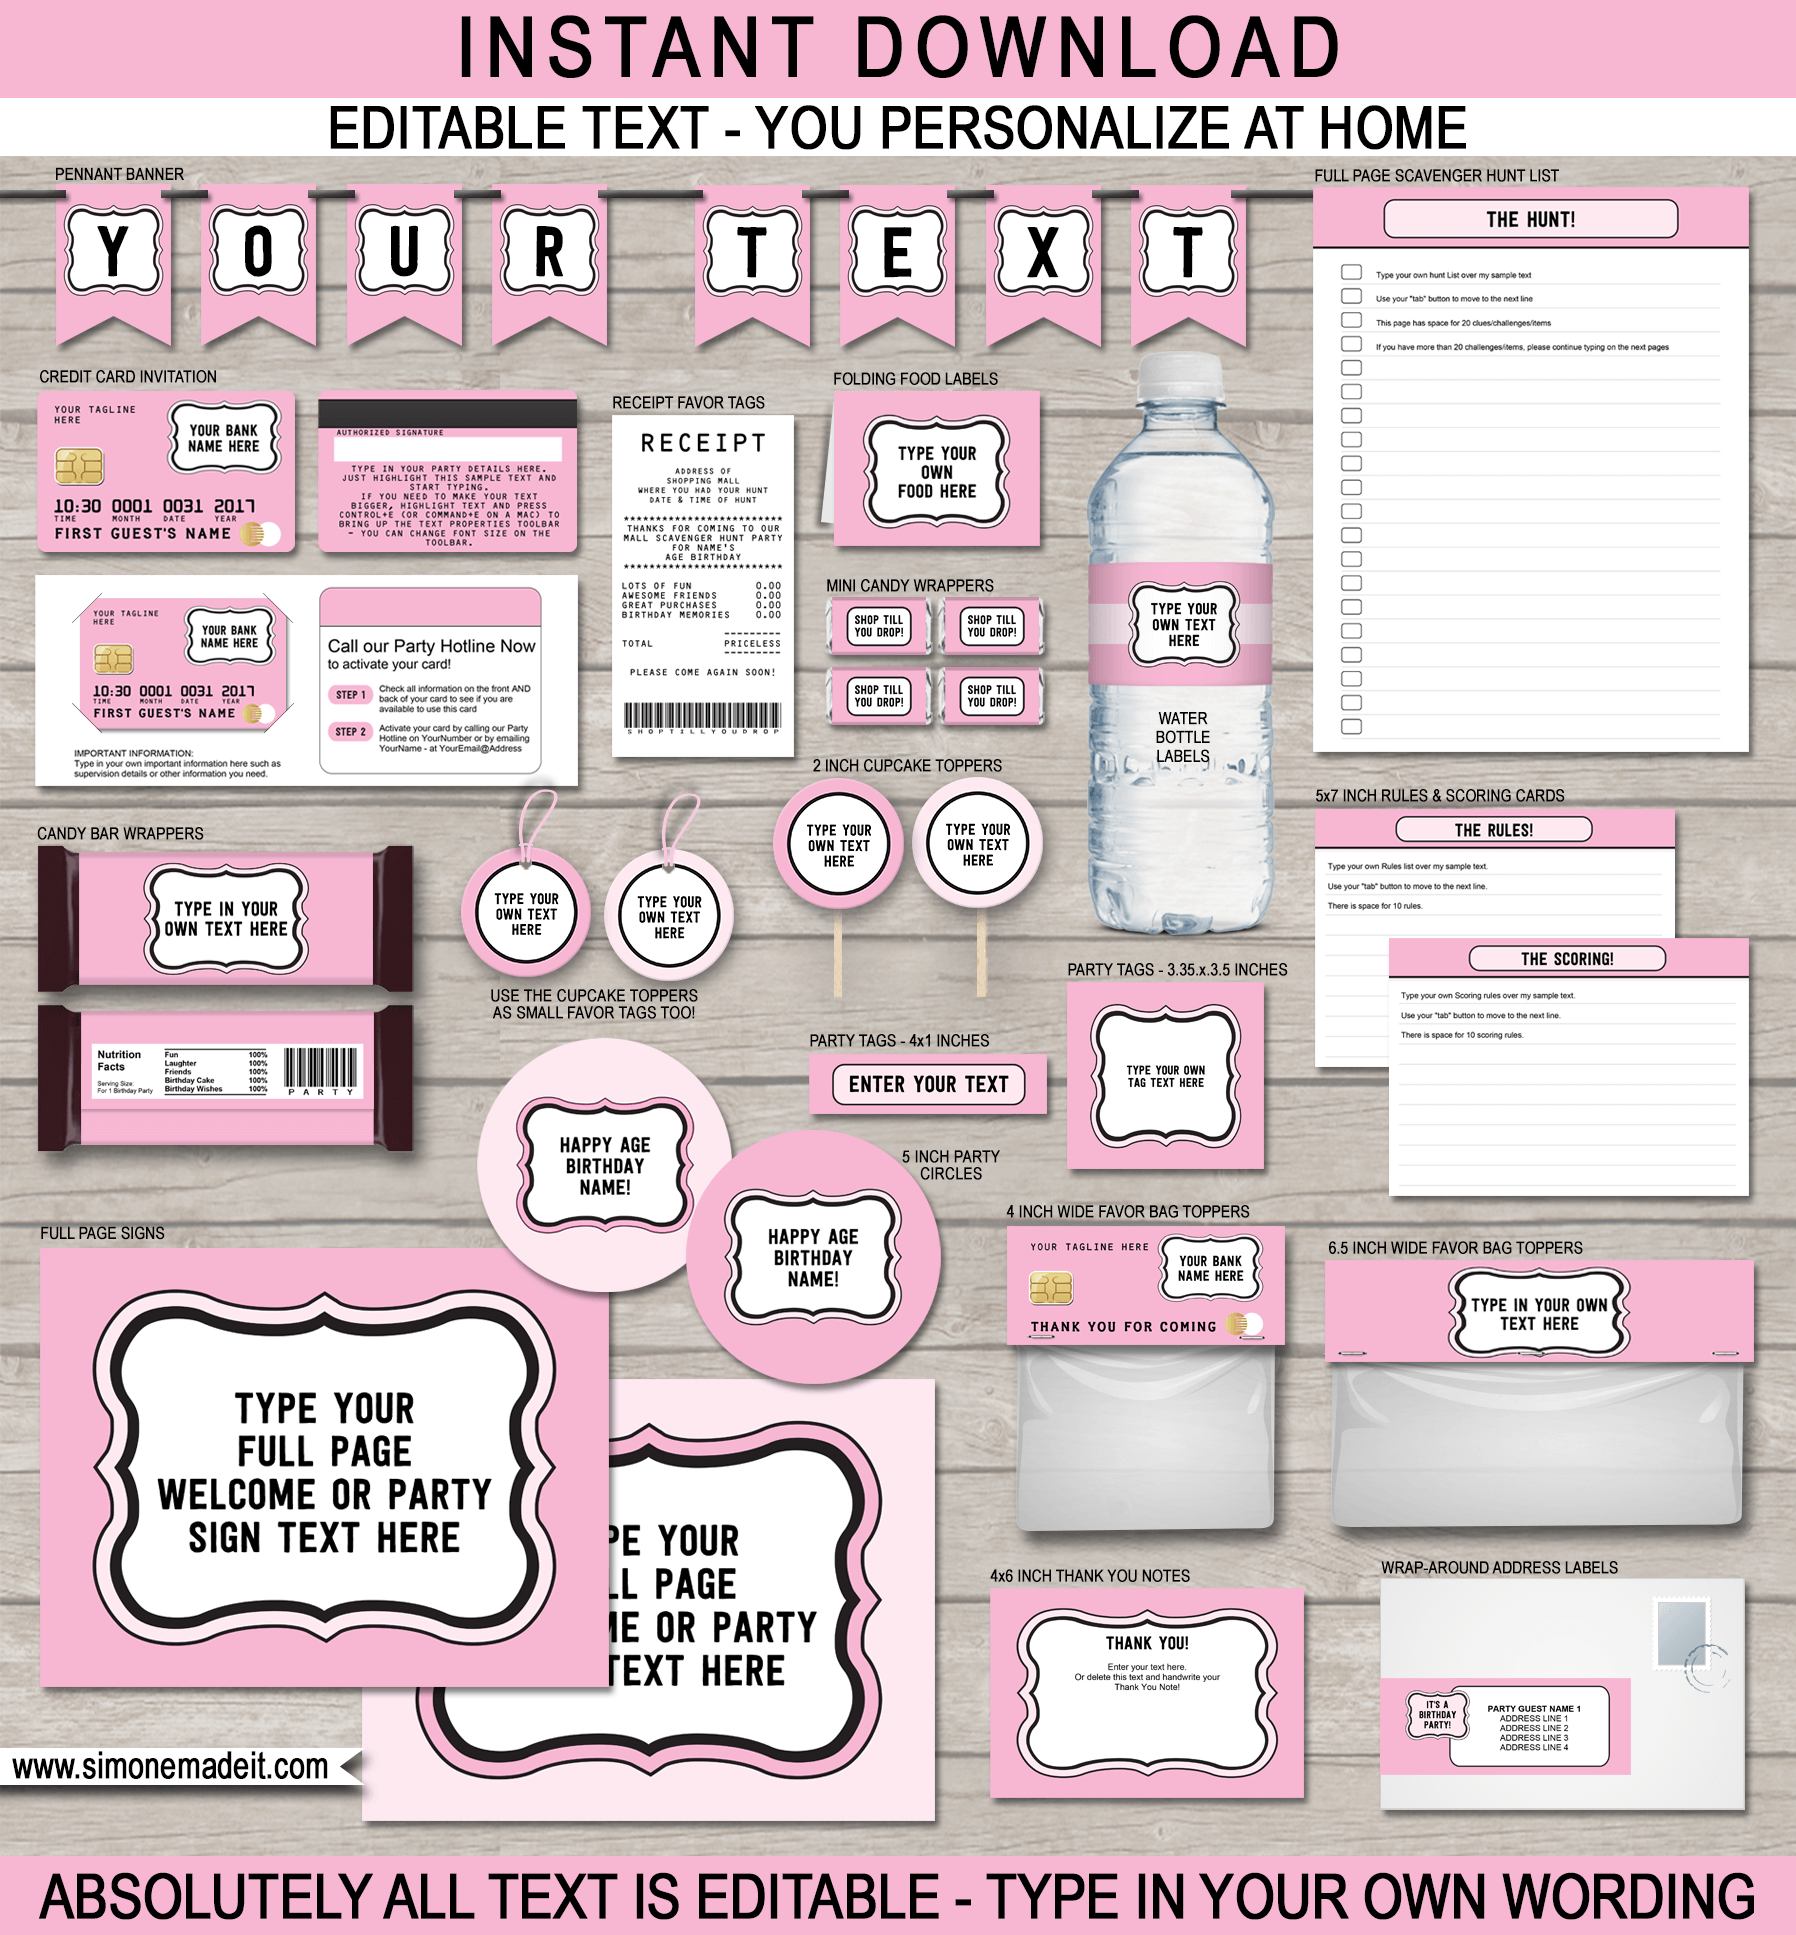 Mall Scavenger Hunt Birthday Invitations & Decorations - Pink - Shopping Theme Party - Editable & Printable templates - INSTANT DOWNLOAD via simonemadeit.com